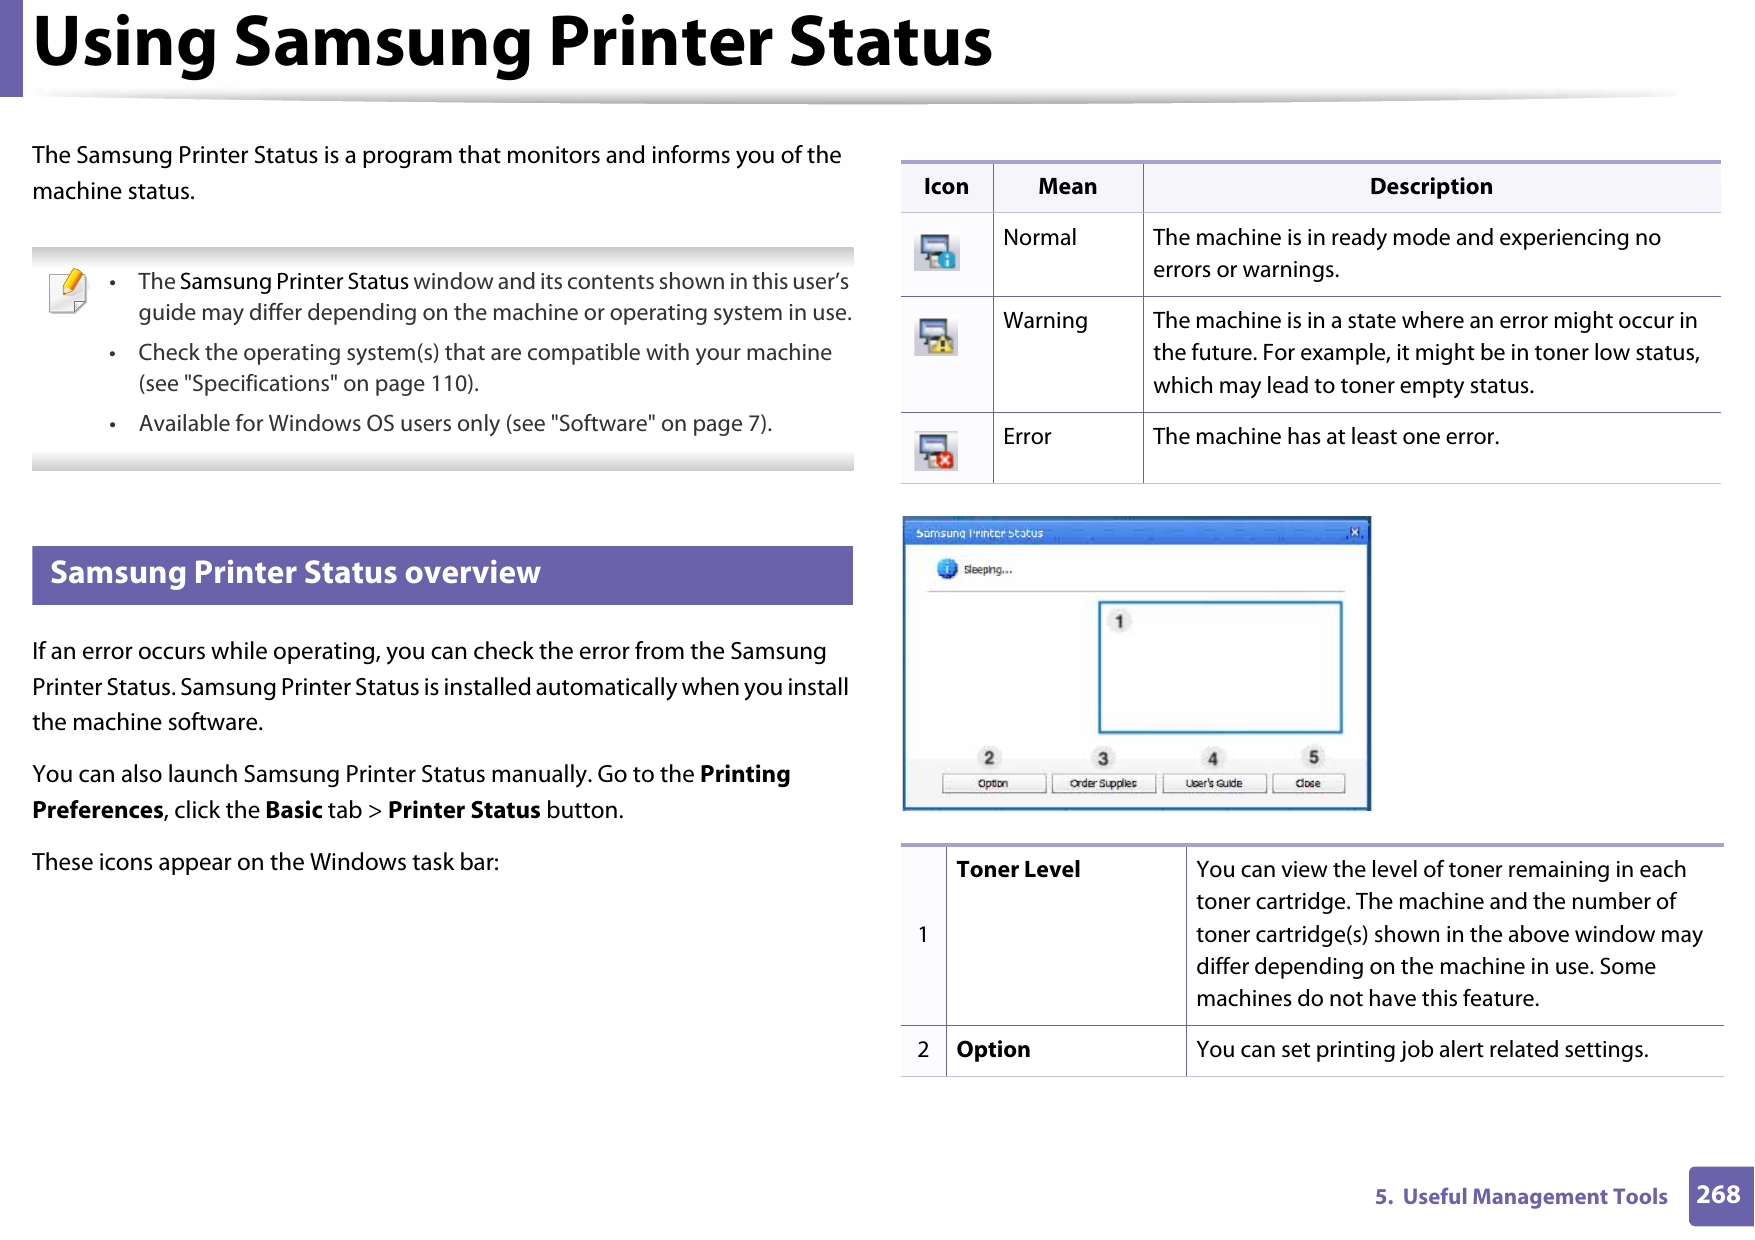 2685.  Useful Management ToolsUsing Samsung Printer Status The Samsung Printer Status is a program that monitors and informs you of the machine status.  • The Samsung Printer Status window and its contents shown in this user’s guide may differ depending on the machine or operating system in use.• Check the operating system(s) that are compatible with your machine (see &quot;Specifications&quot; on page 110).• Available for Windows OS users only (see &quot;Software&quot; on page 7). 7 Samsung Printer Status overviewIf an error occurs while operating, you can check the error from the Samsung Printer Status. Samsung Printer Status is installed automatically when you install the machine software. You can also launch Samsung Printer Status manually. Go to the Printing Preferences, click the Basic tab &gt; Printer Status button.These icons appear on the Windows task bar:Icon Mean DescriptionNormal The machine is in ready mode and experiencing no errors or warnings.Warning The machine is in a state where an error might occur in the future. For example, it might be in toner low status, which may lead to toner empty status. Error The machine has at least one error.1Toner Level You can view the level of toner remaining in each toner cartridge. The machine and the number of toner cartridge(s) shown in the above window may differ depending on the machine in use. Some machines do not have this feature.2Option You can set printing job alert related settings. 